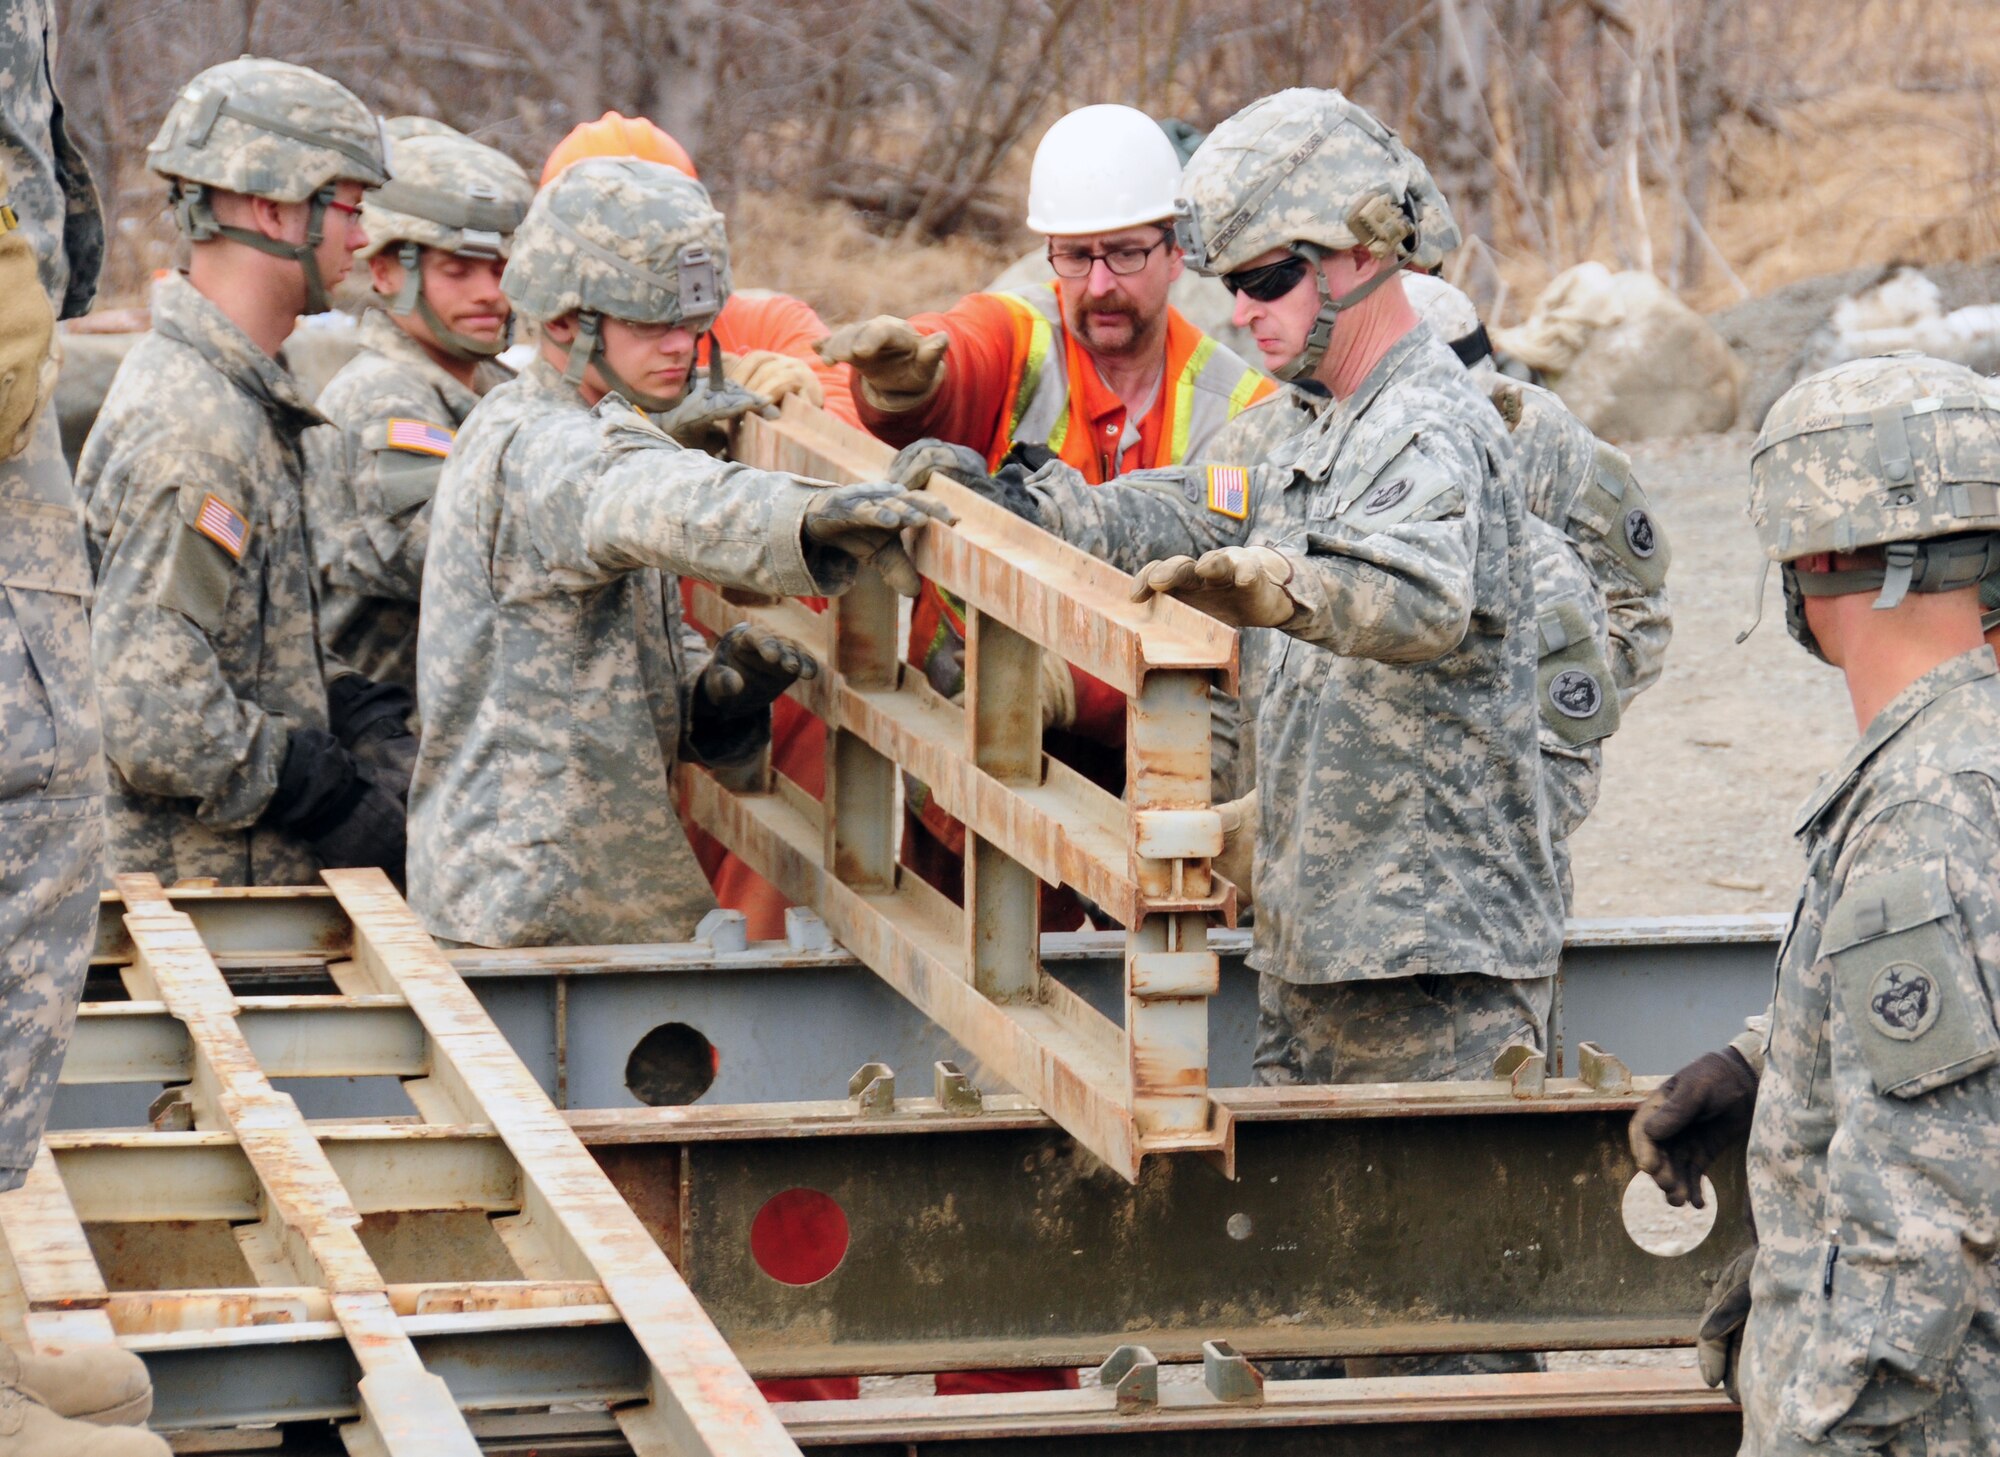 ANCHORAGE, Alaska -- Soldiers with the 56th Engineer Company, Fort Richardson, Alaska, and personnel from the Alaska Department of Transportation and Public Facilities move pieces during the assembly of an M2 Bailey Bridge during exercise Arctic Edge 10 April 28, 2010. As part of the exercise, the Soldiers and ADOTPF personnel worked to install the temporary bridge over Ship Creek northeast of Anchorage. (U.S. Air Force photo by Capt. Uriah Orland)